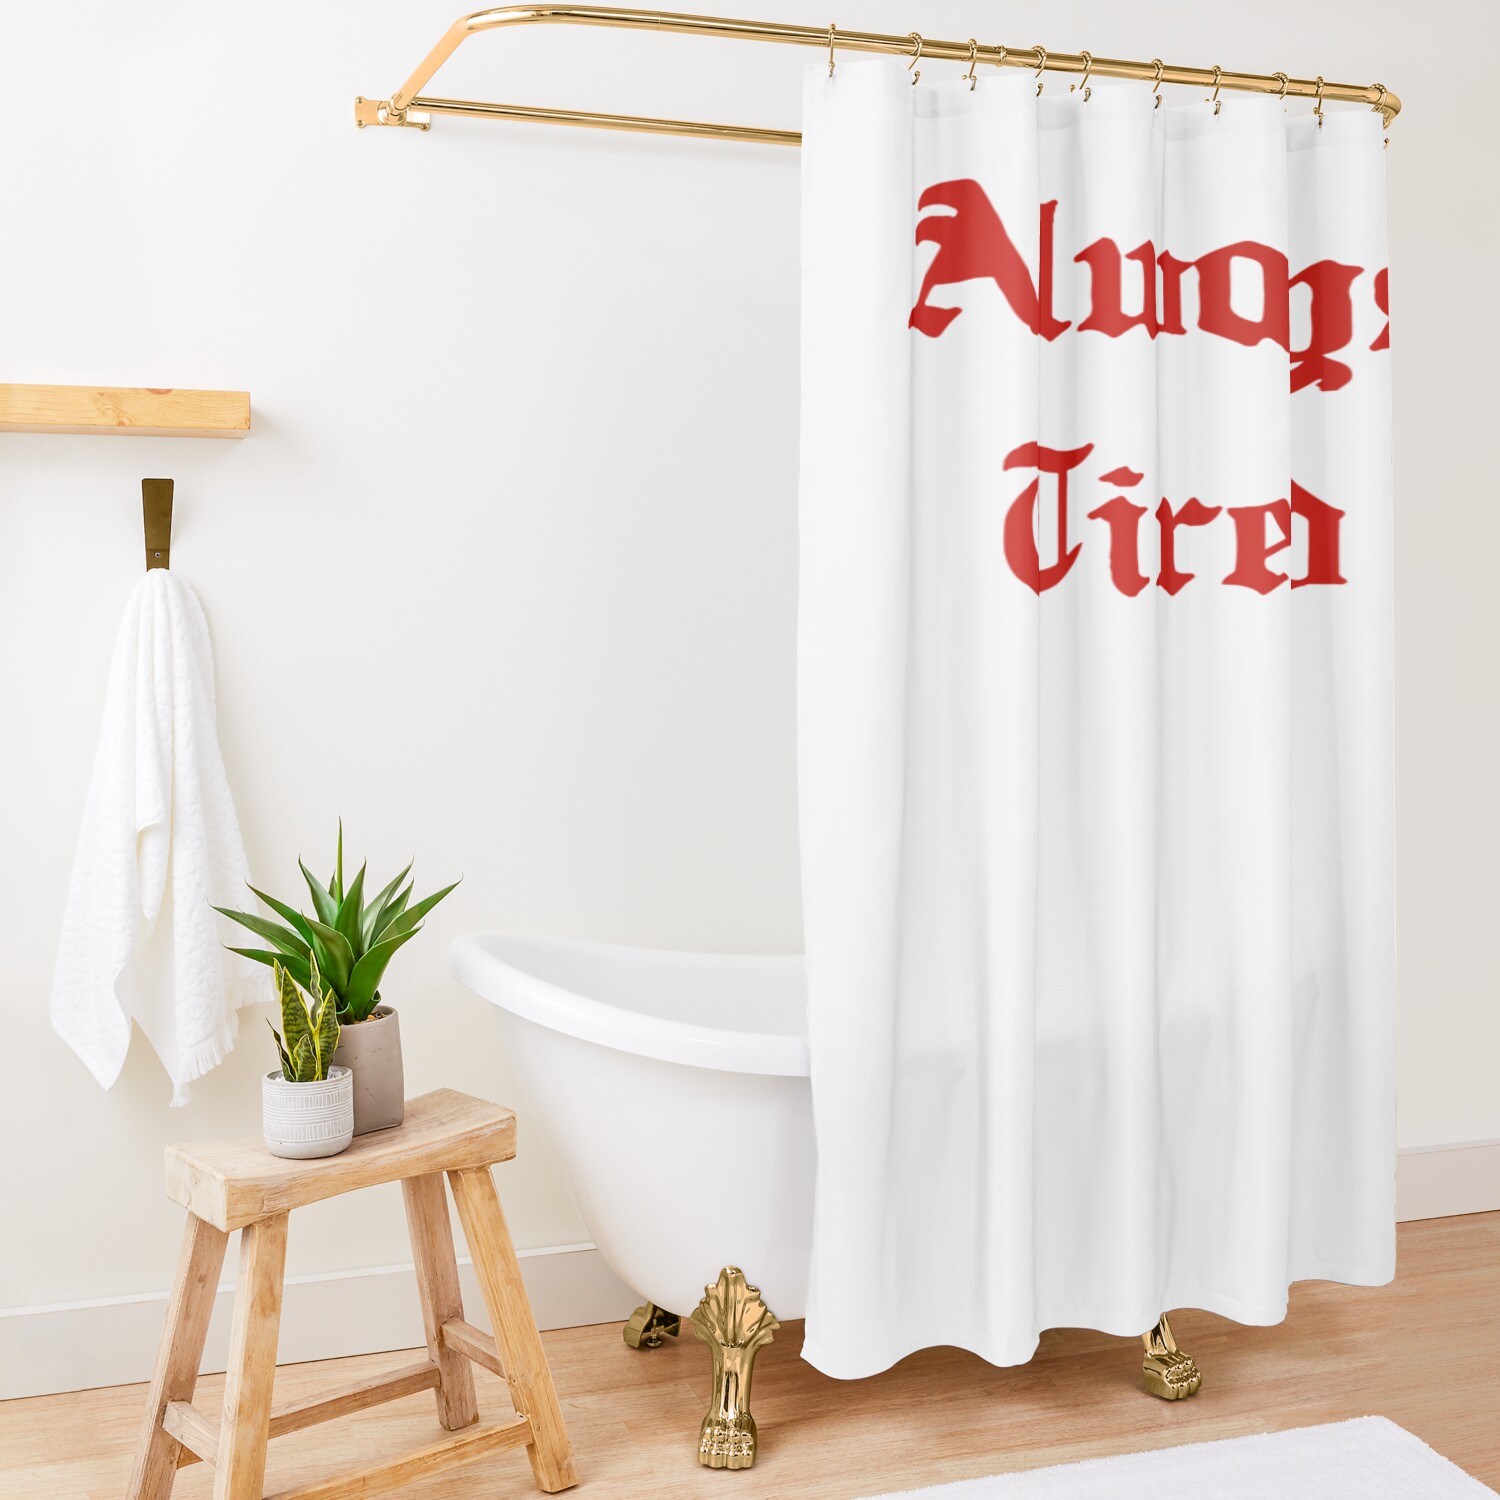 urshower curtain opensquare1500x1500 4 - Sam And Colby Shop